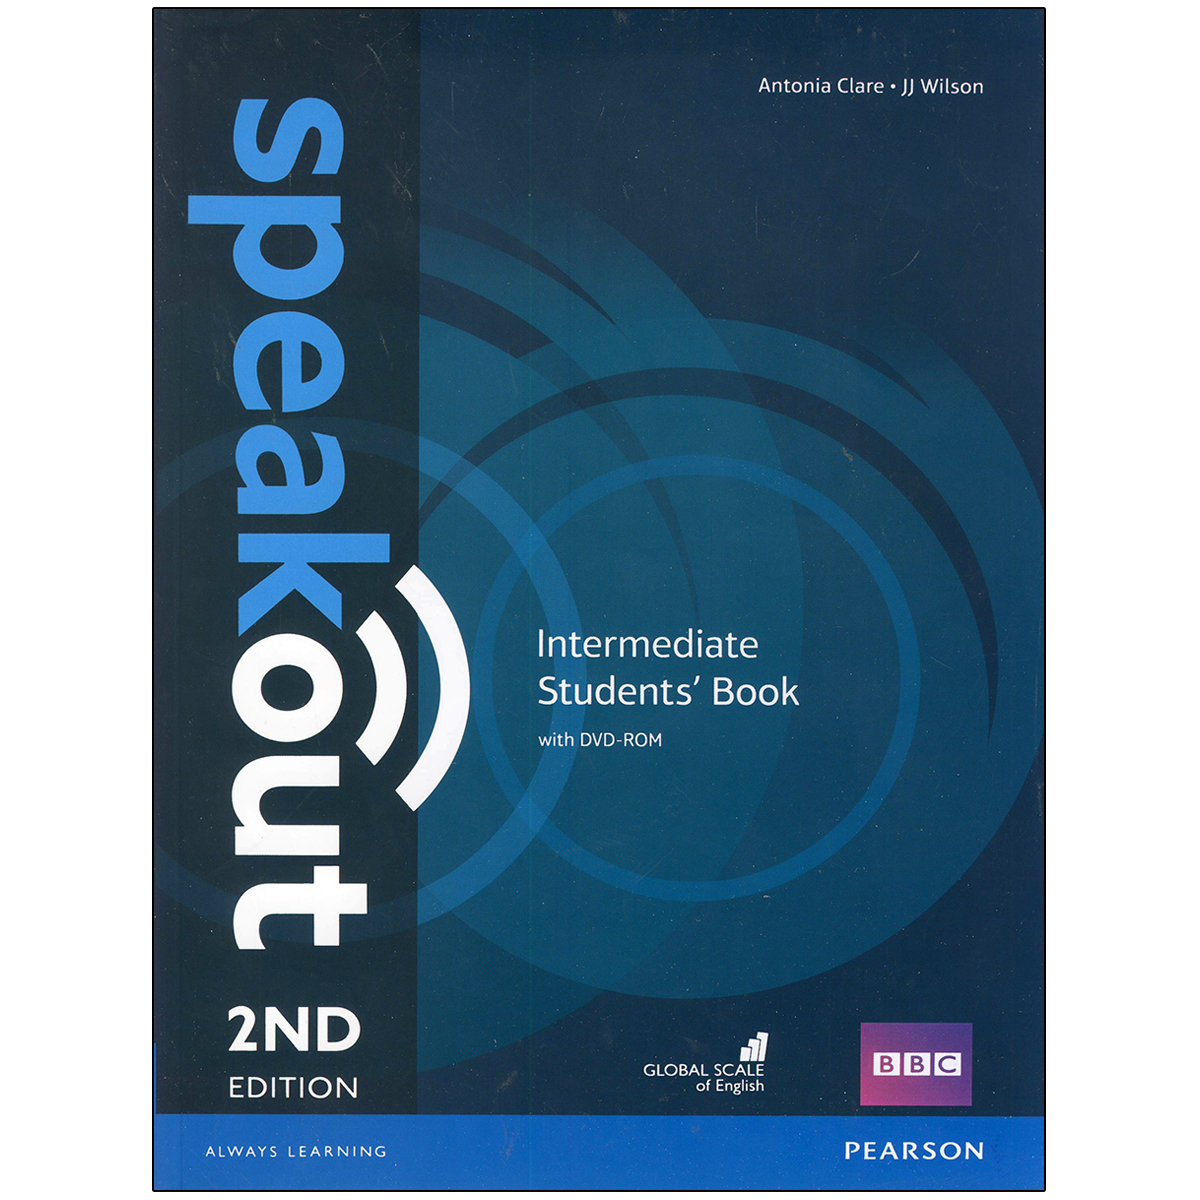 Students book 6 класс ответы. Speakout pre-Intermediate 2nd Edition. Speakout Intermediate 2nd Edition. Speak out 2 ND Edition pre Intermediate Workbook. Speakout Intermediate 2 издание.